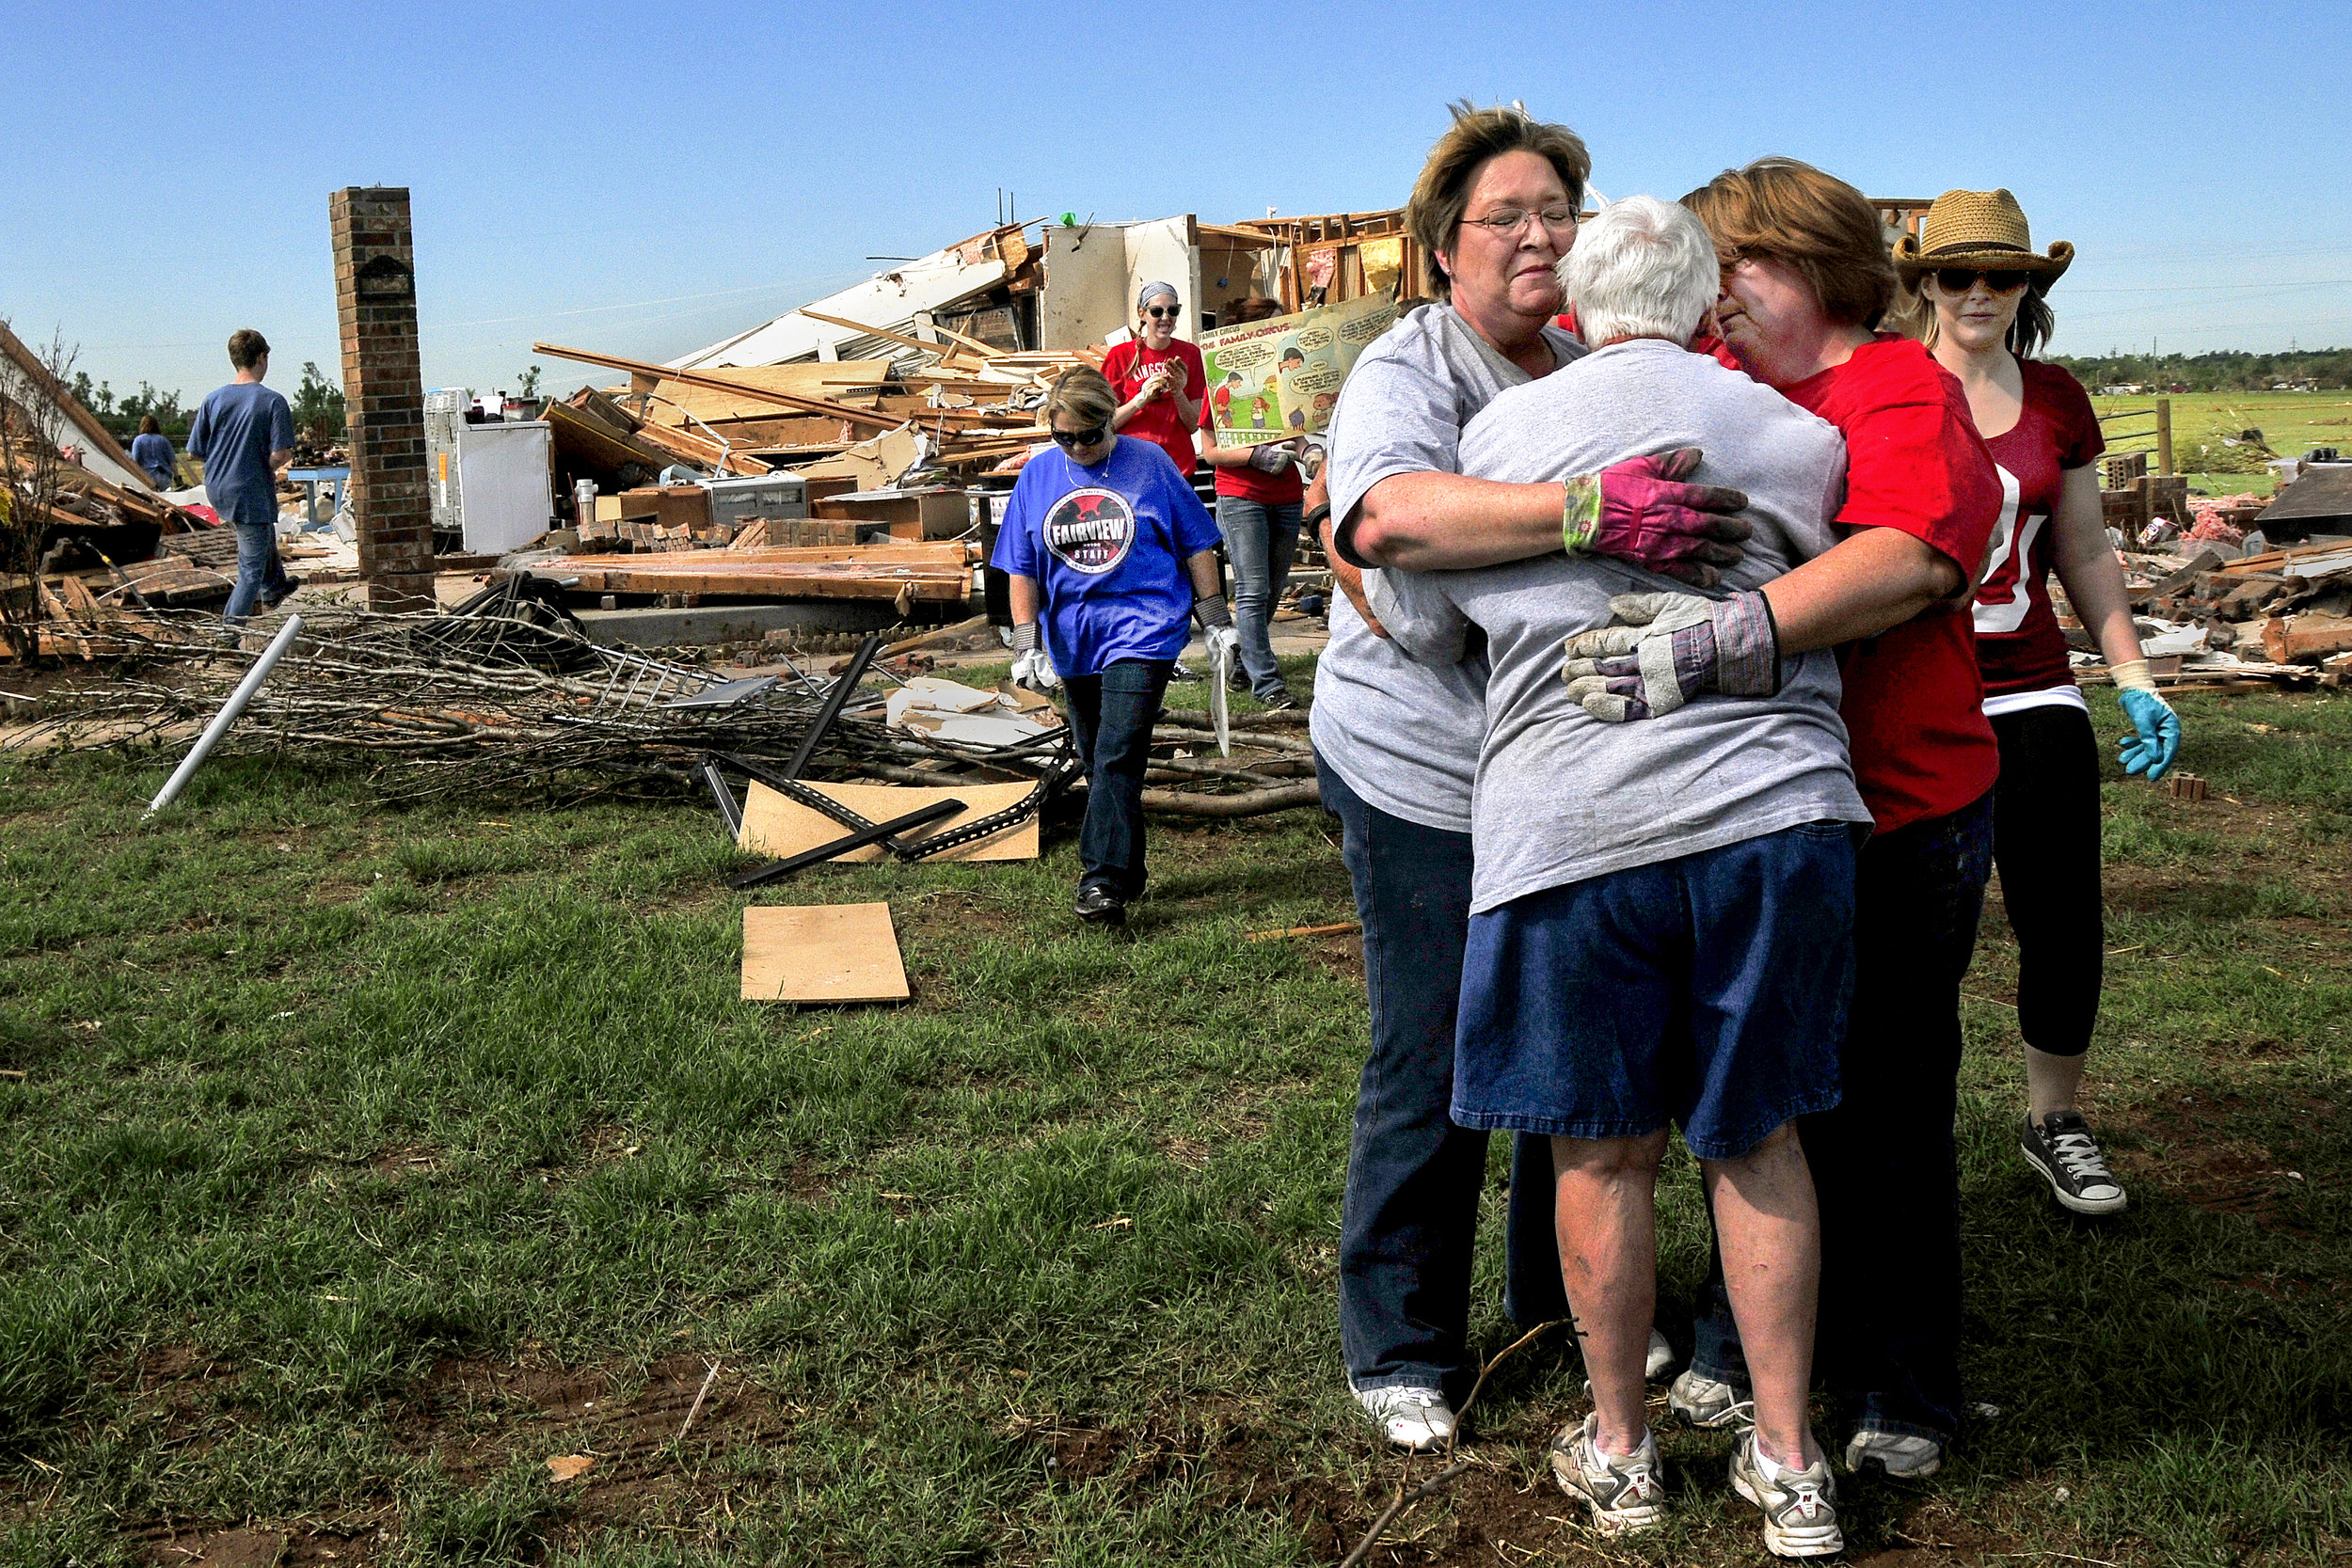  Teachers from Fairview Elementary school embrace former school counselor Kay Johnson, center, in front of her home in a neighborhood that was in the direct path of Mondays Tornado on Wednesday May, 22 in South Oklahoma City just west of Moore. The p